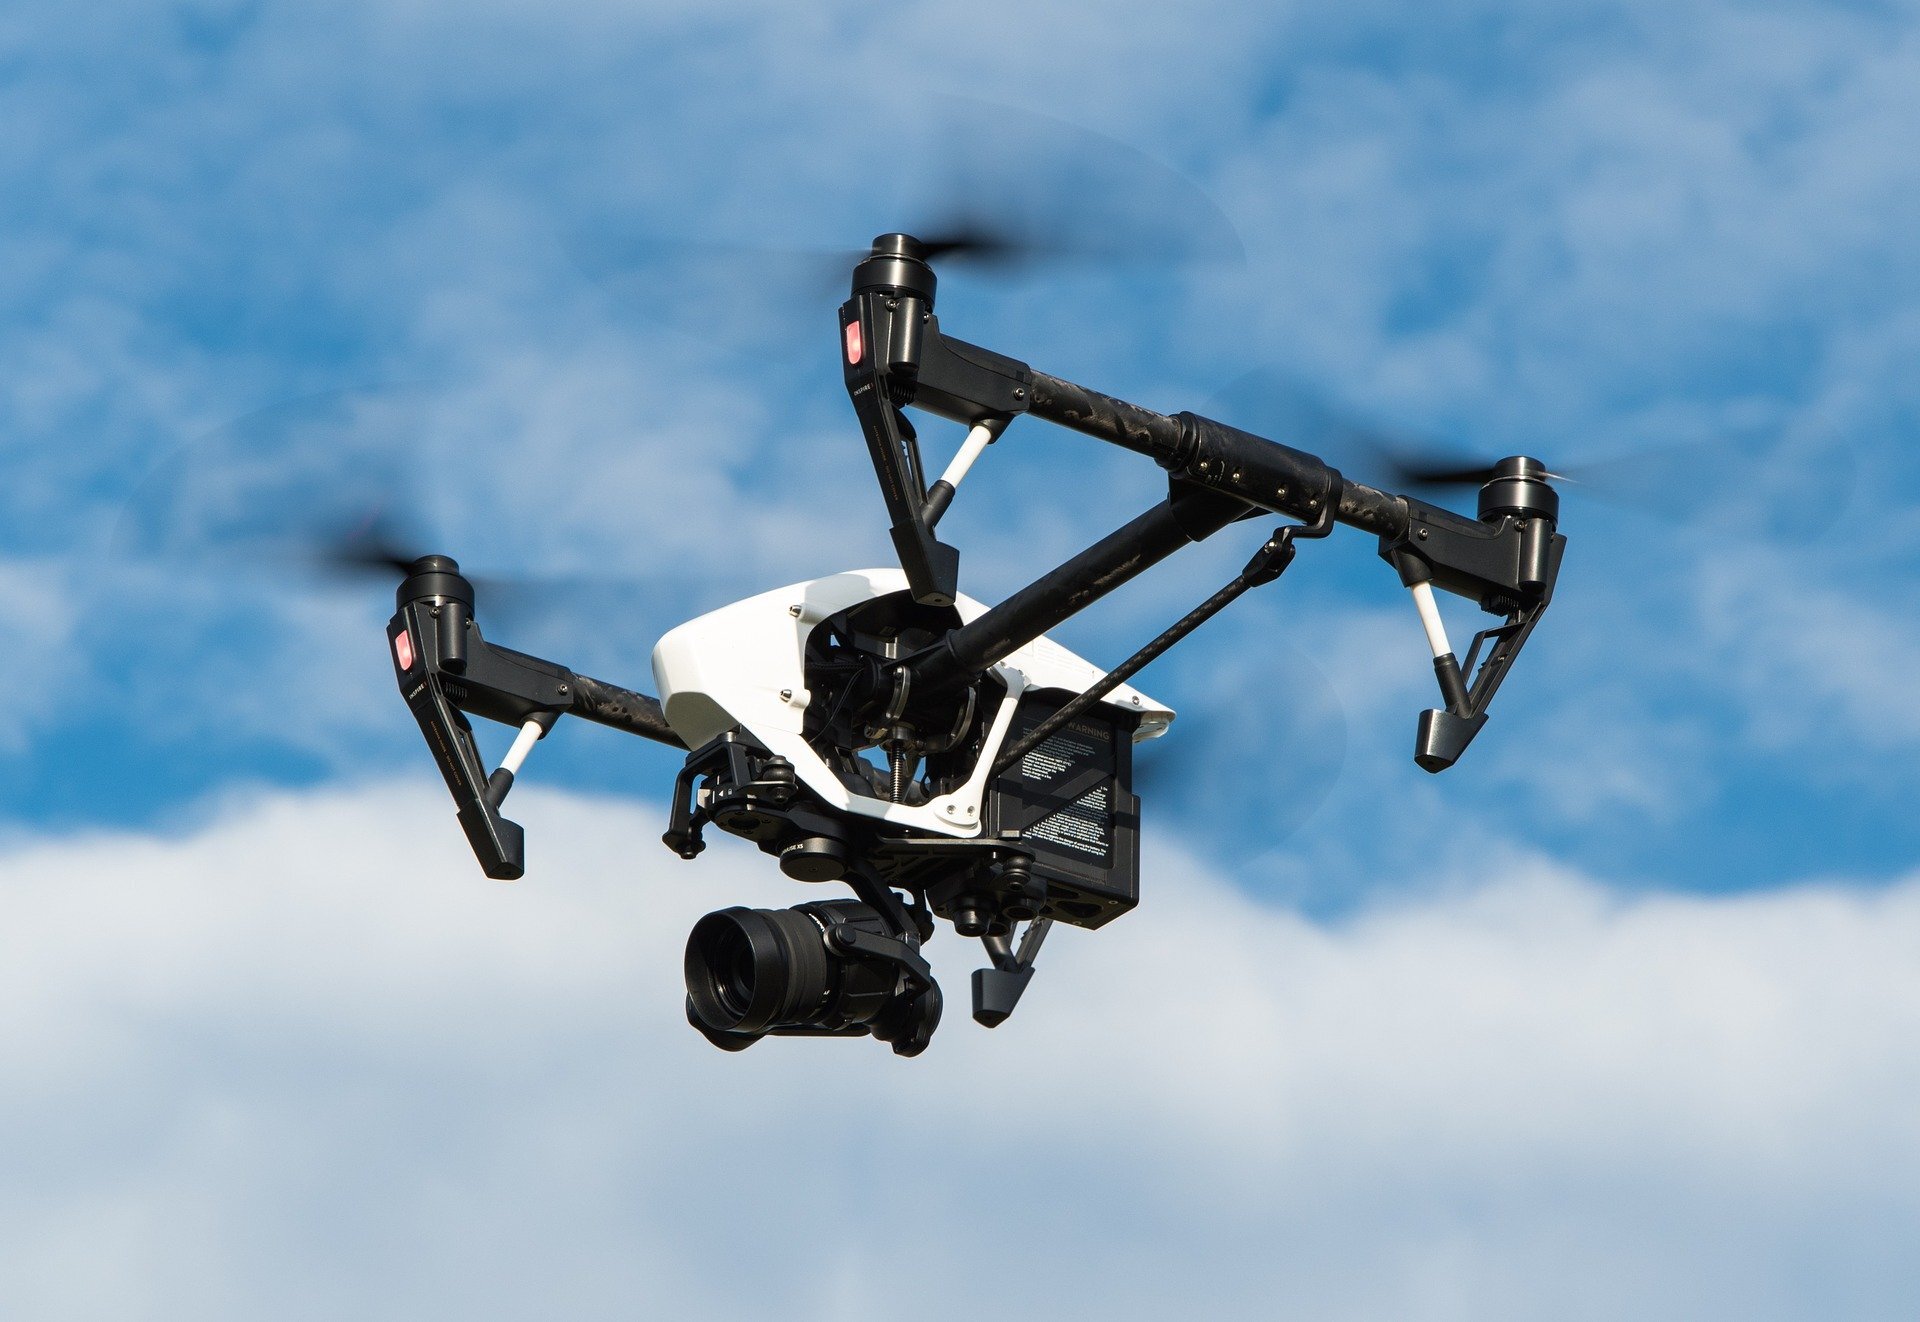 #Utilities use unmanned aircraft to find problems